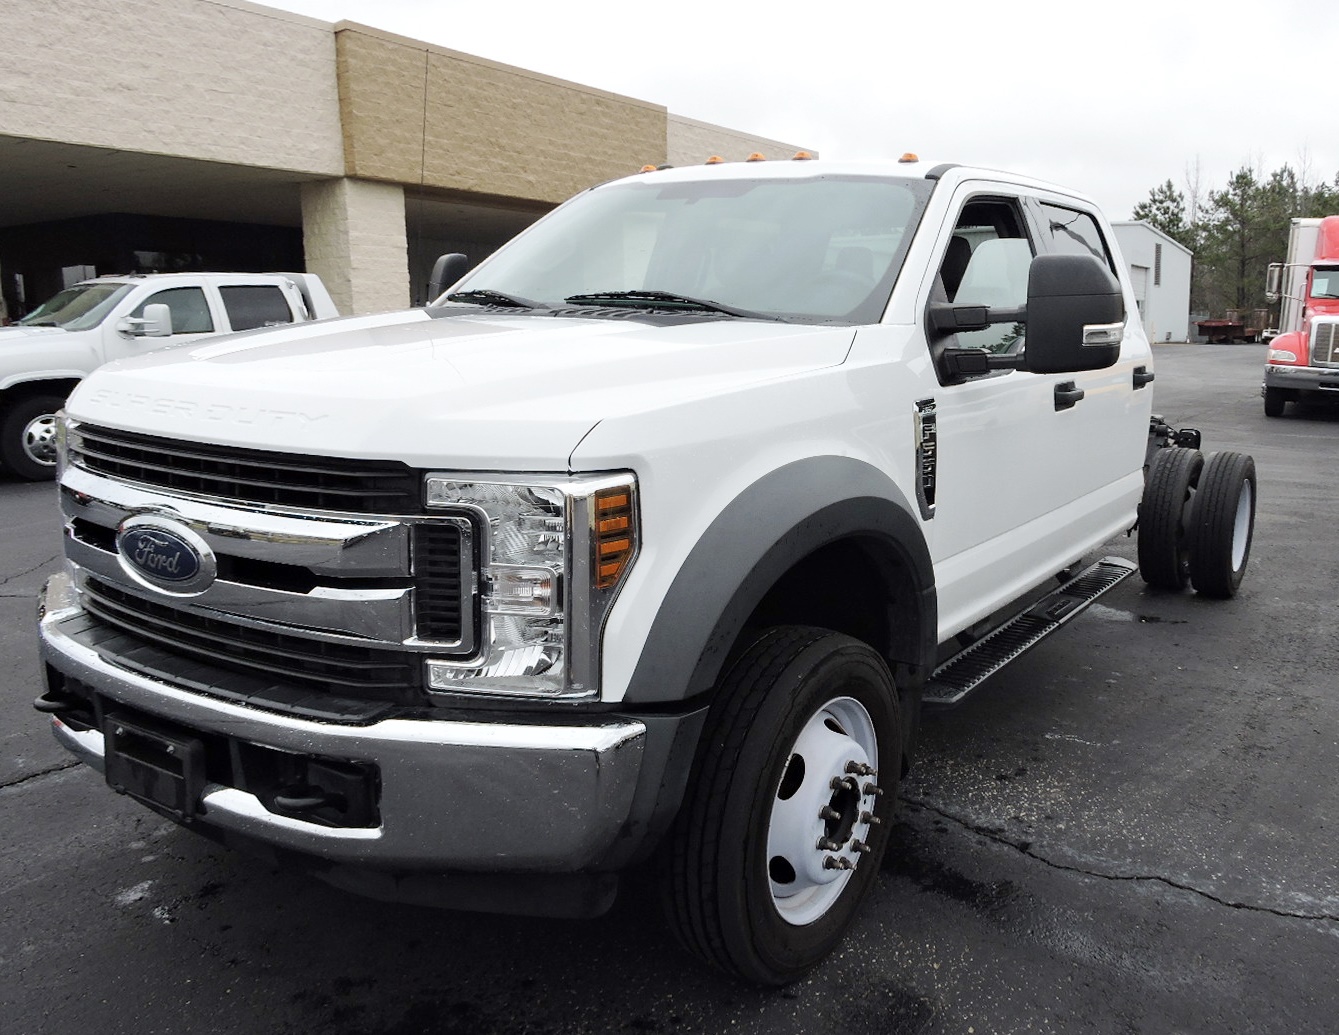 2019 FORD F-550 CREW CAB C&C CAB CHASSIS TRUCK #1231564